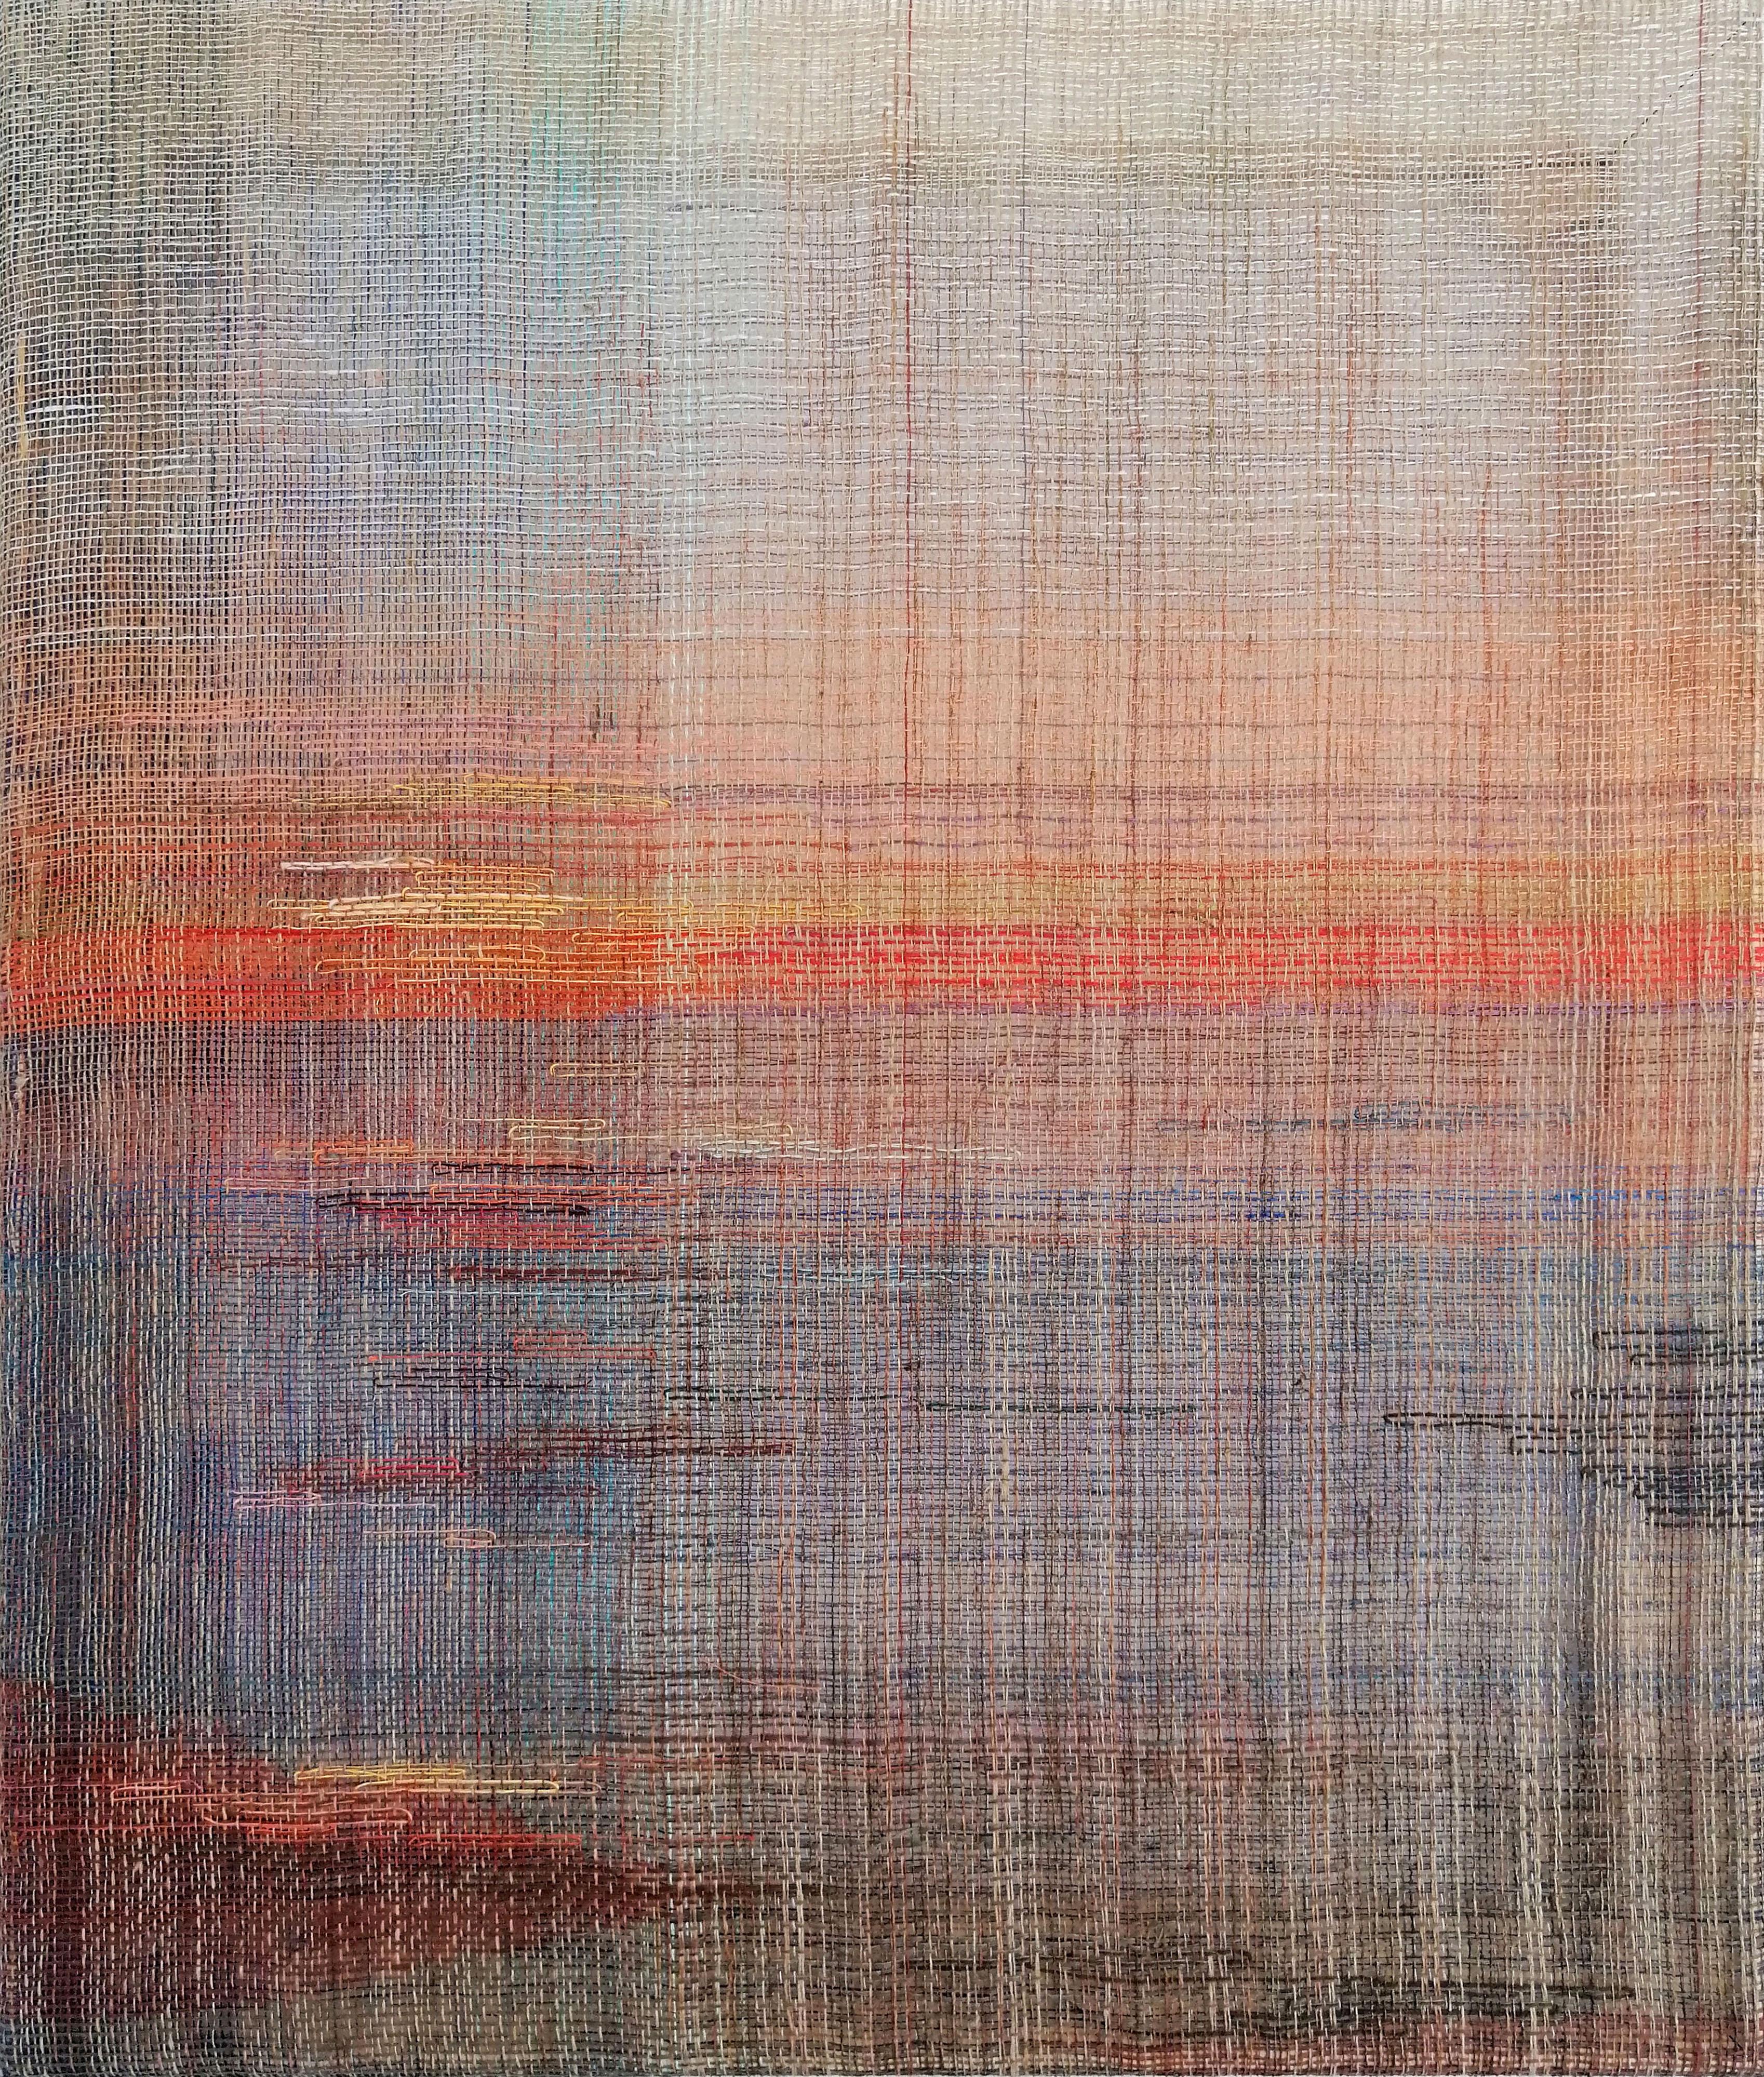 Sunset - Handwoven  Abstract Landscape, Contemporary Woven and Painted Artwork